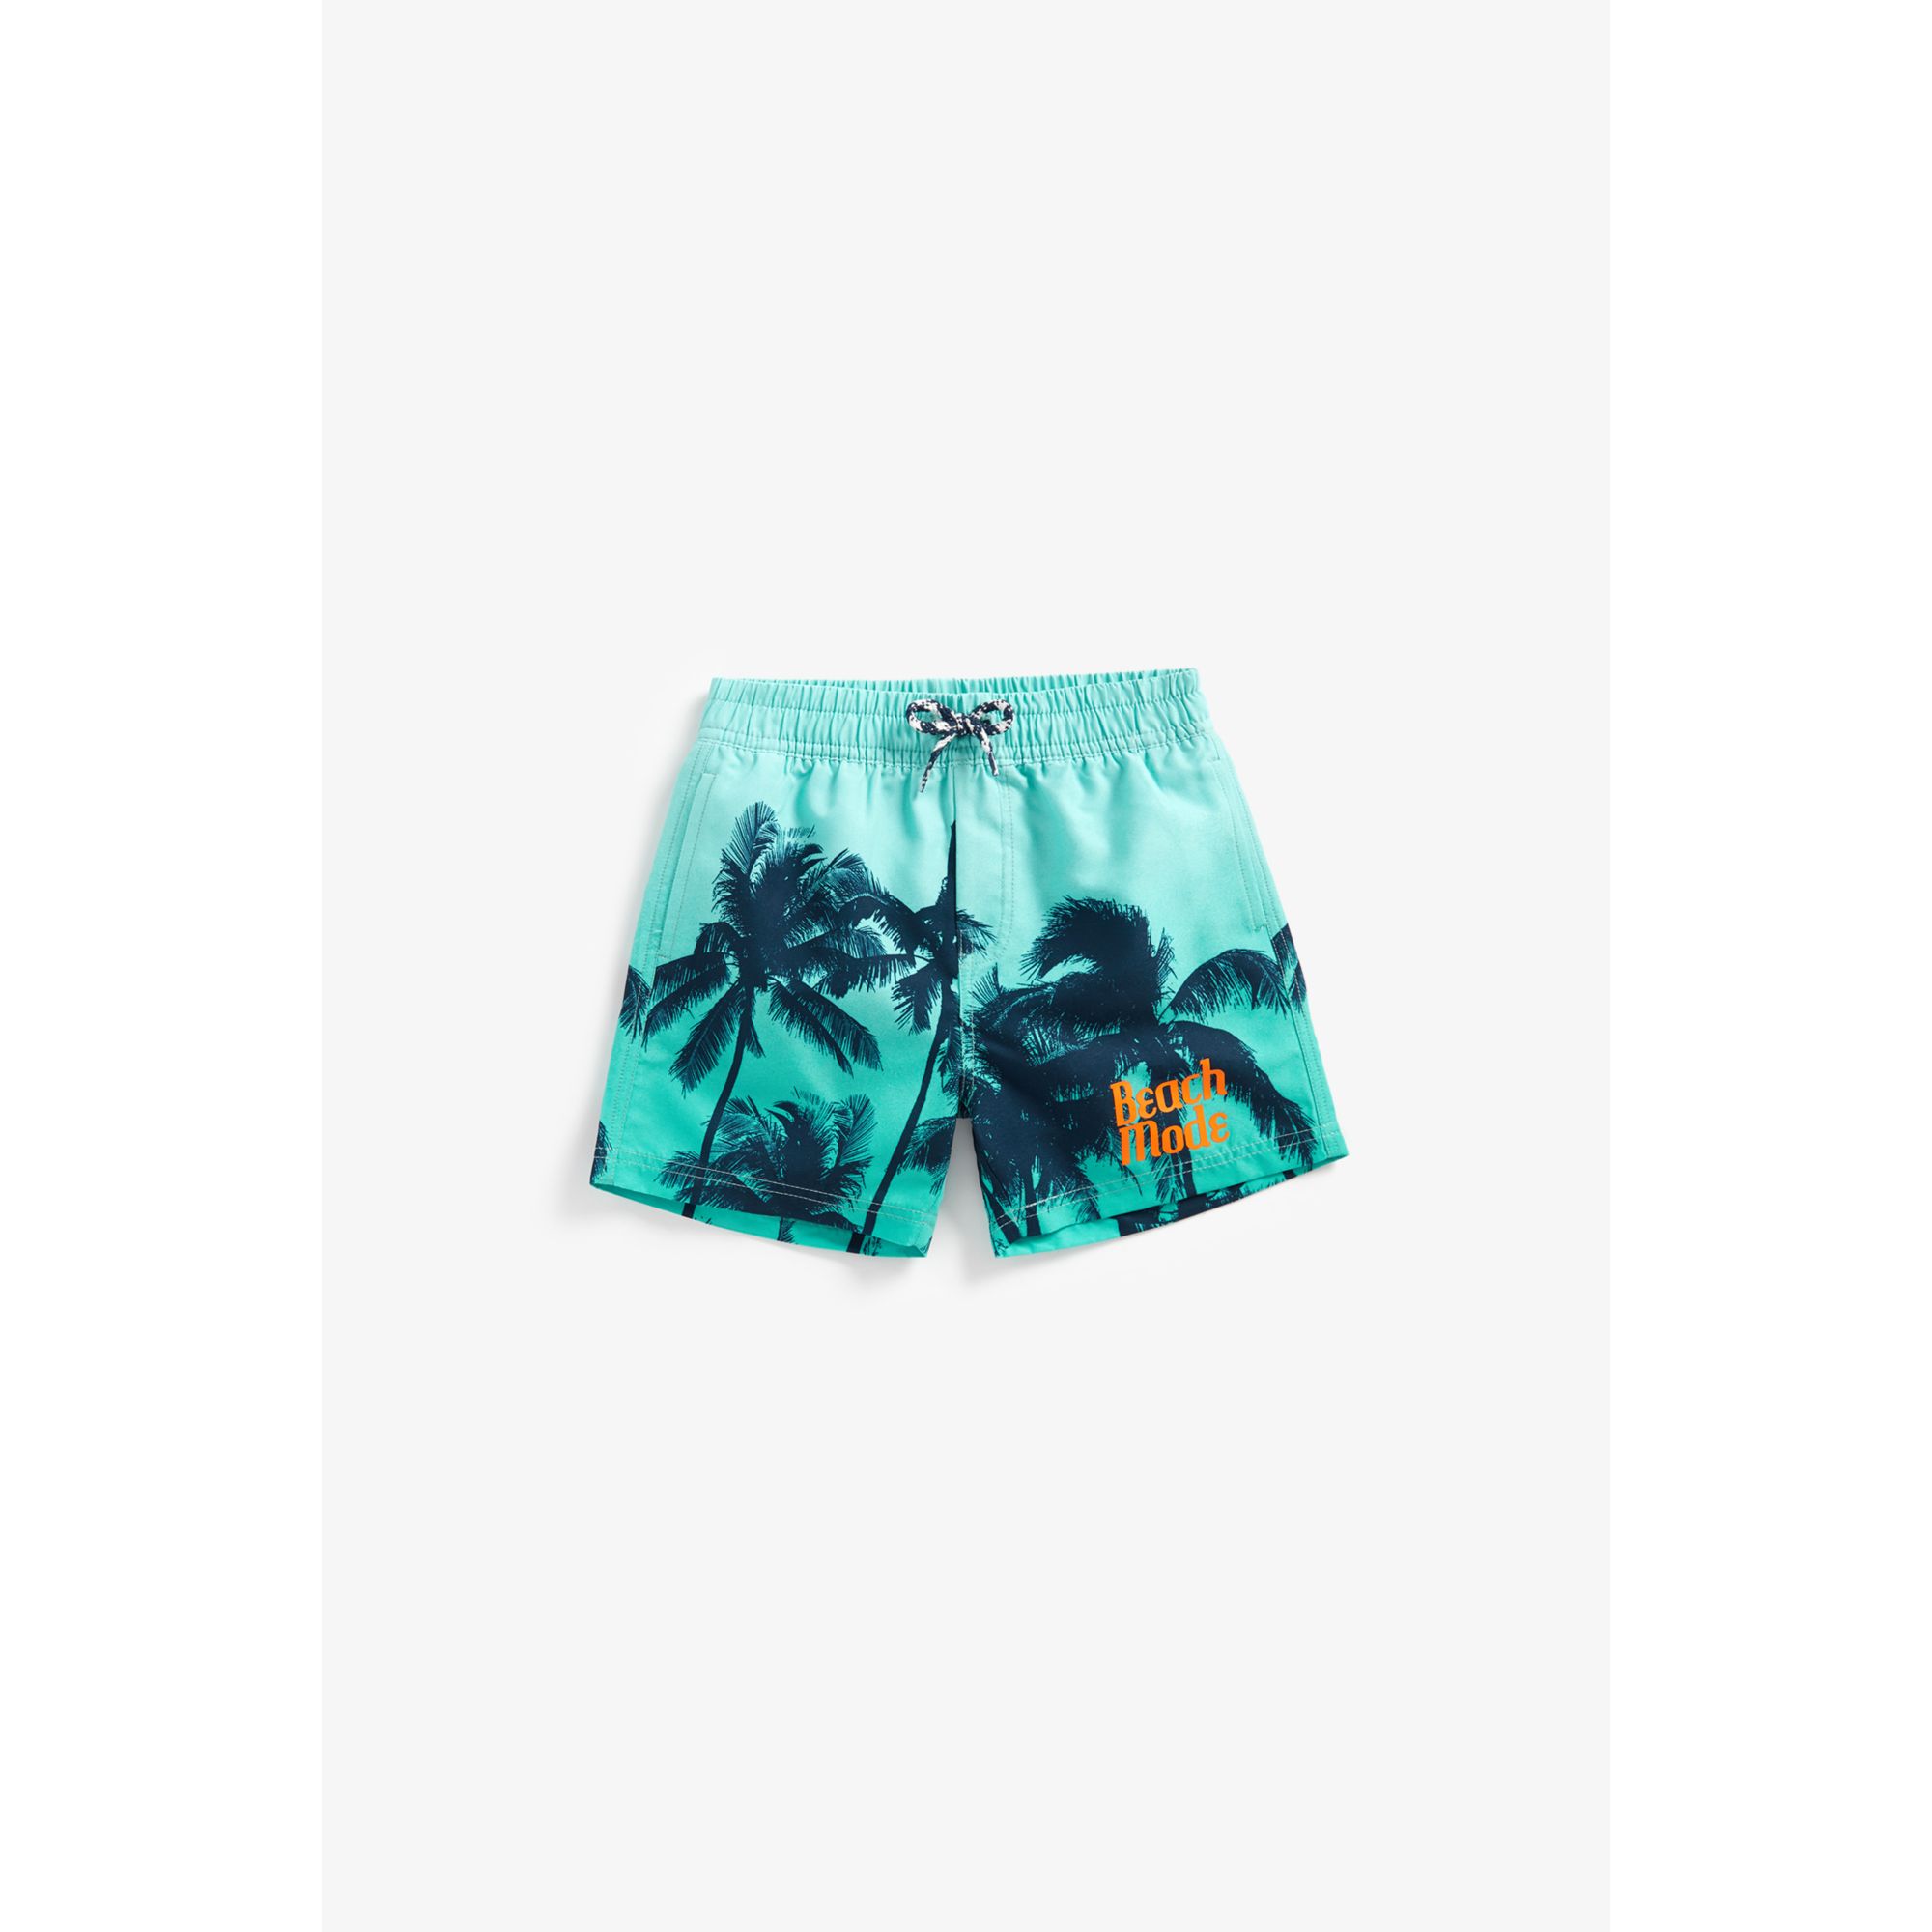 Buy Palm Tree Board Shorts online | Mothercare UAE